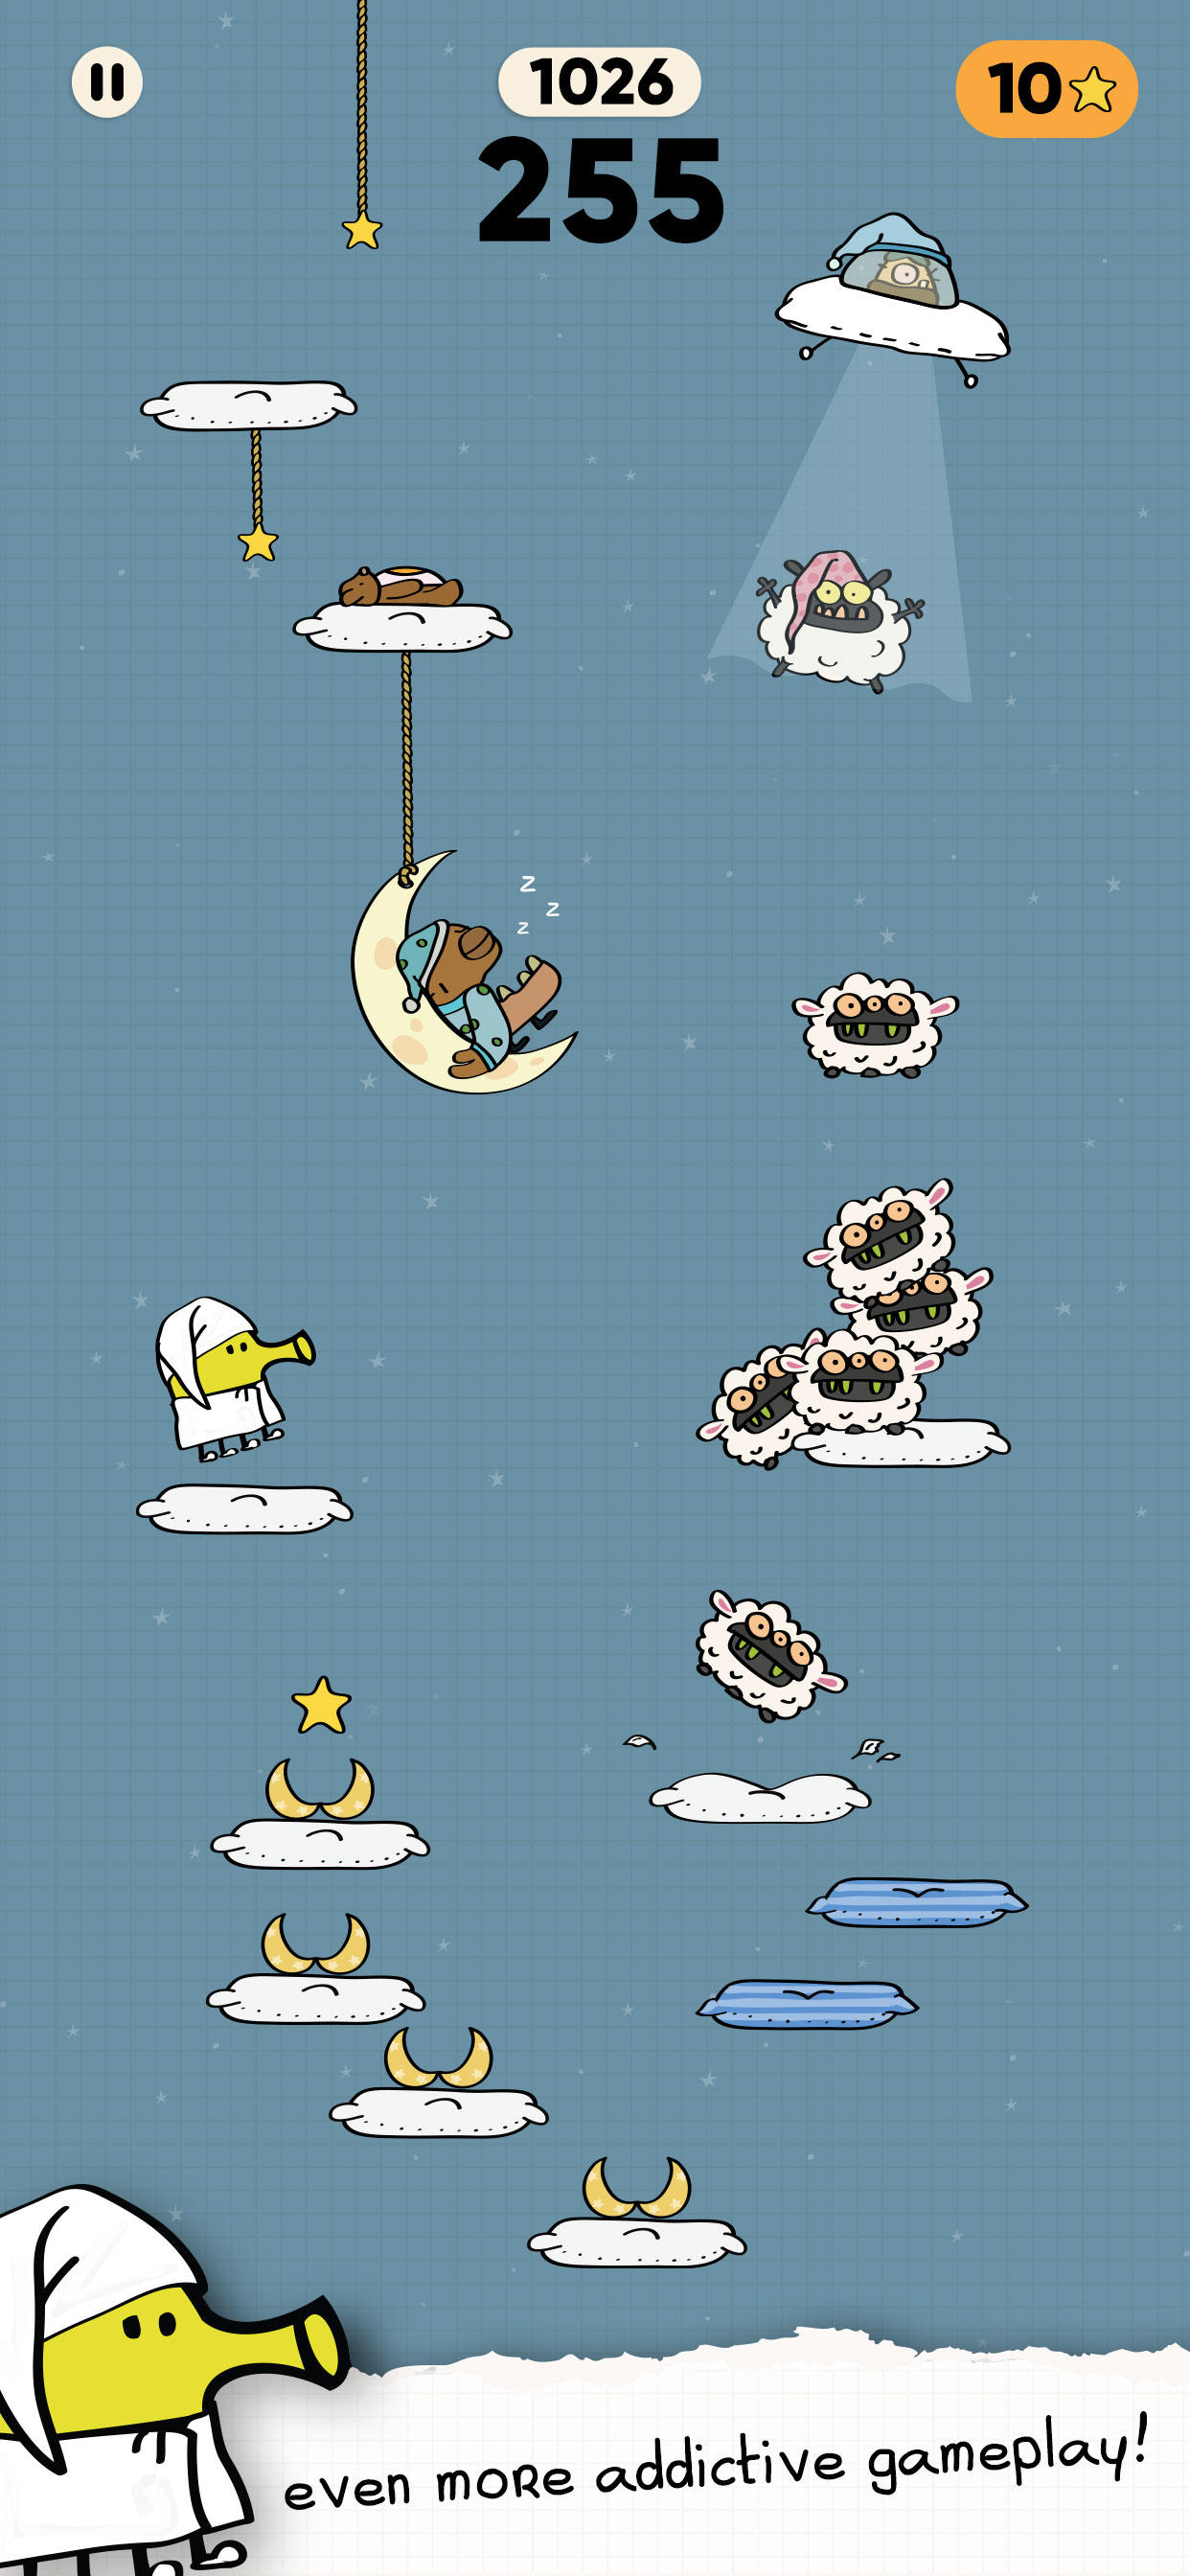 Doodle Jump: A Classic Game Revisited - TapSmart